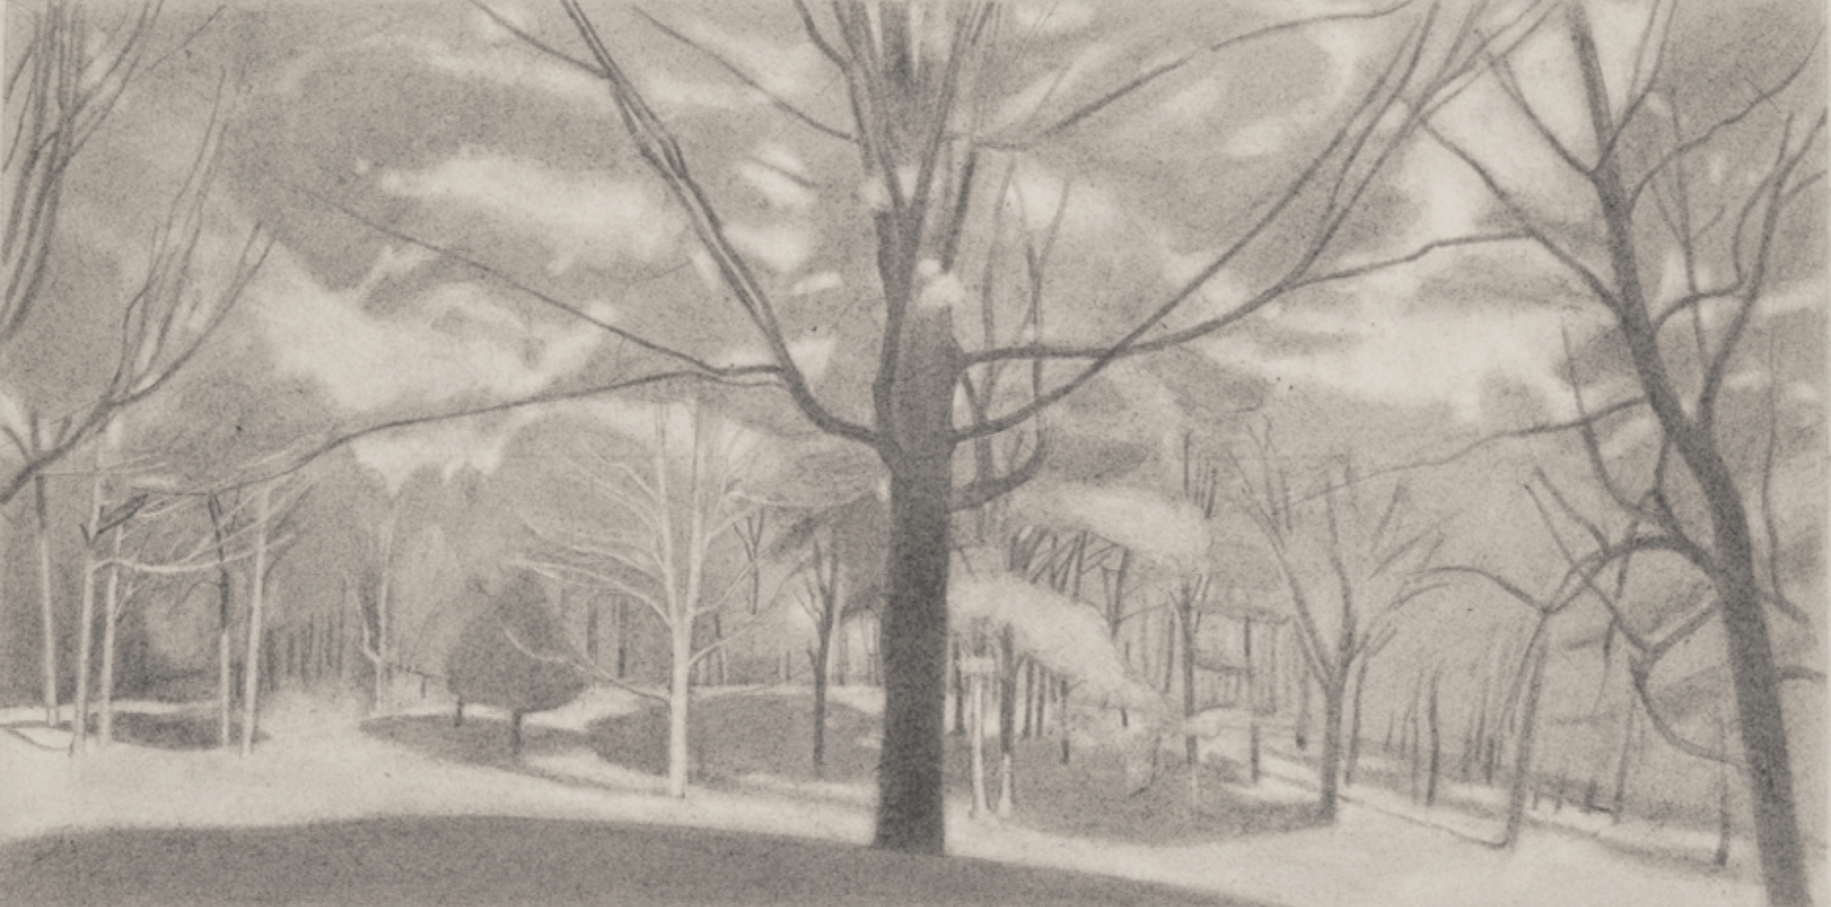 Ron Milewicz, Sugar Maple 2, 2017, pencil on paper, 9 x 18 inches